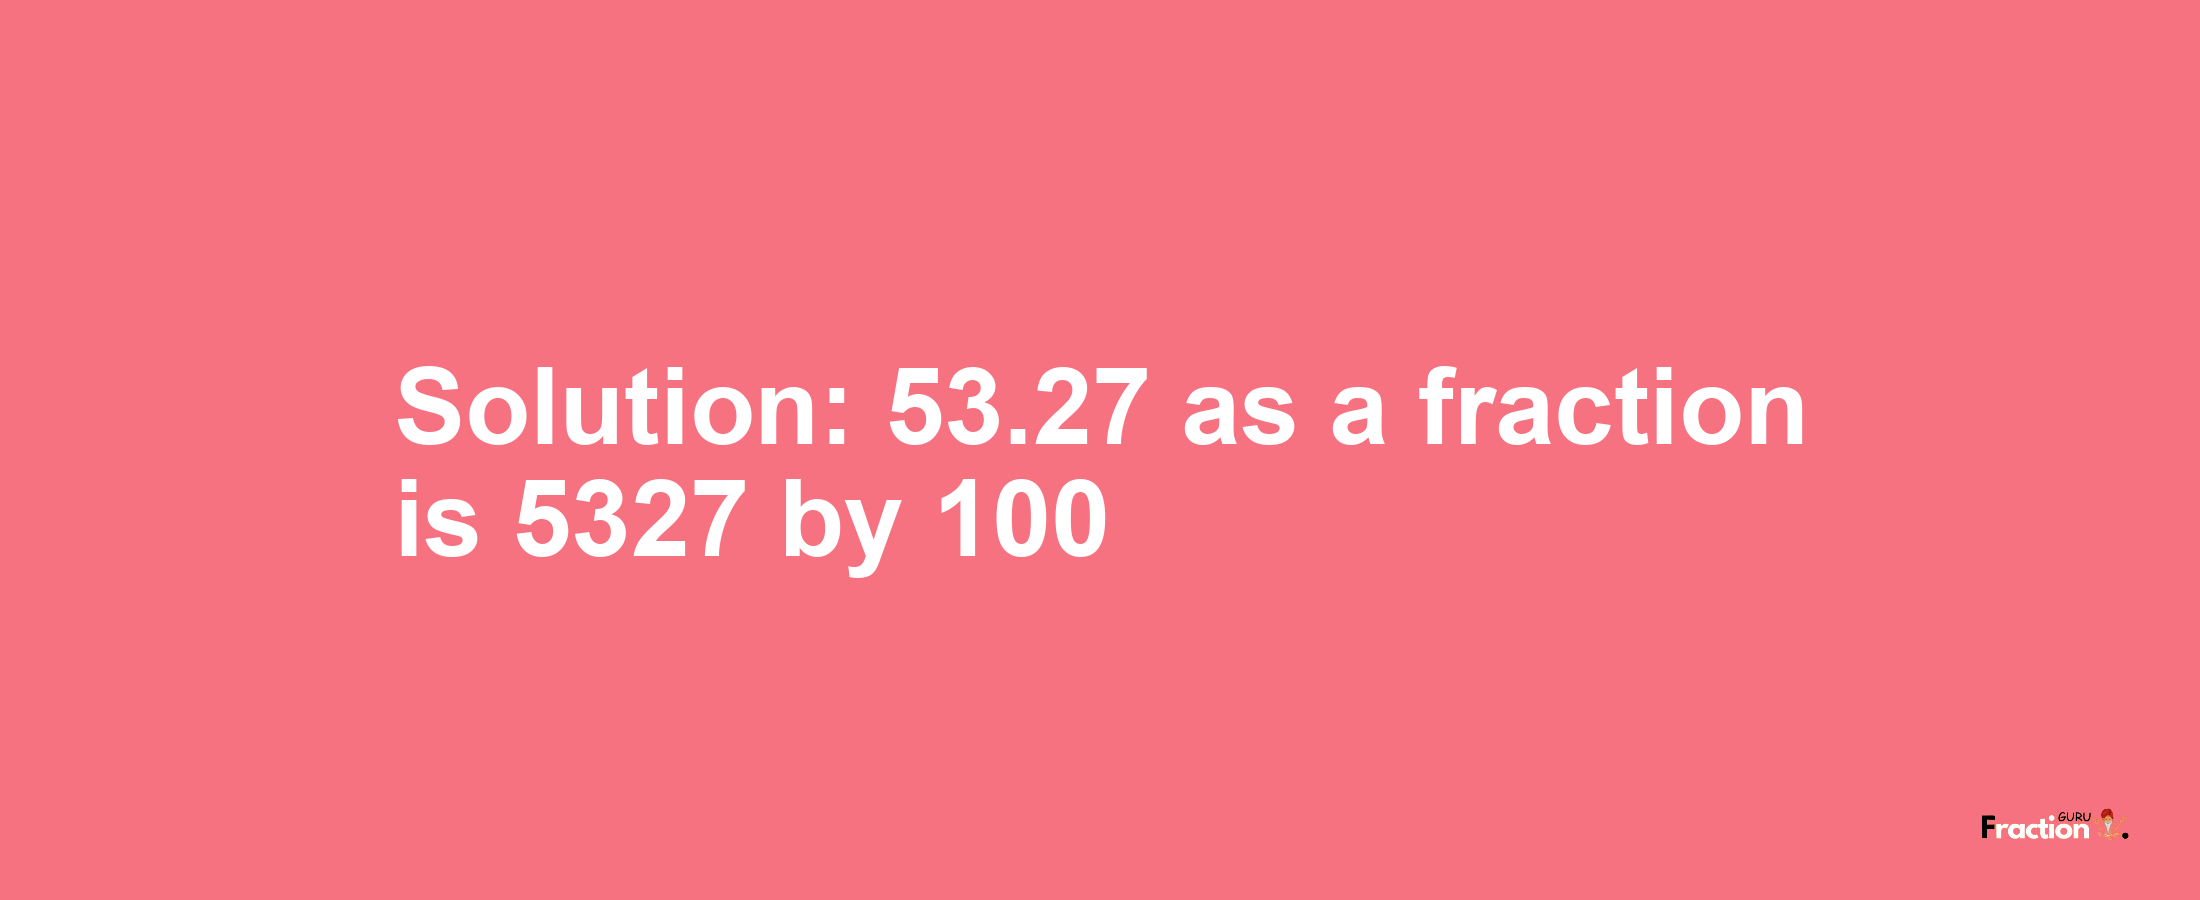 Solution:53.27 as a fraction is 5327/100